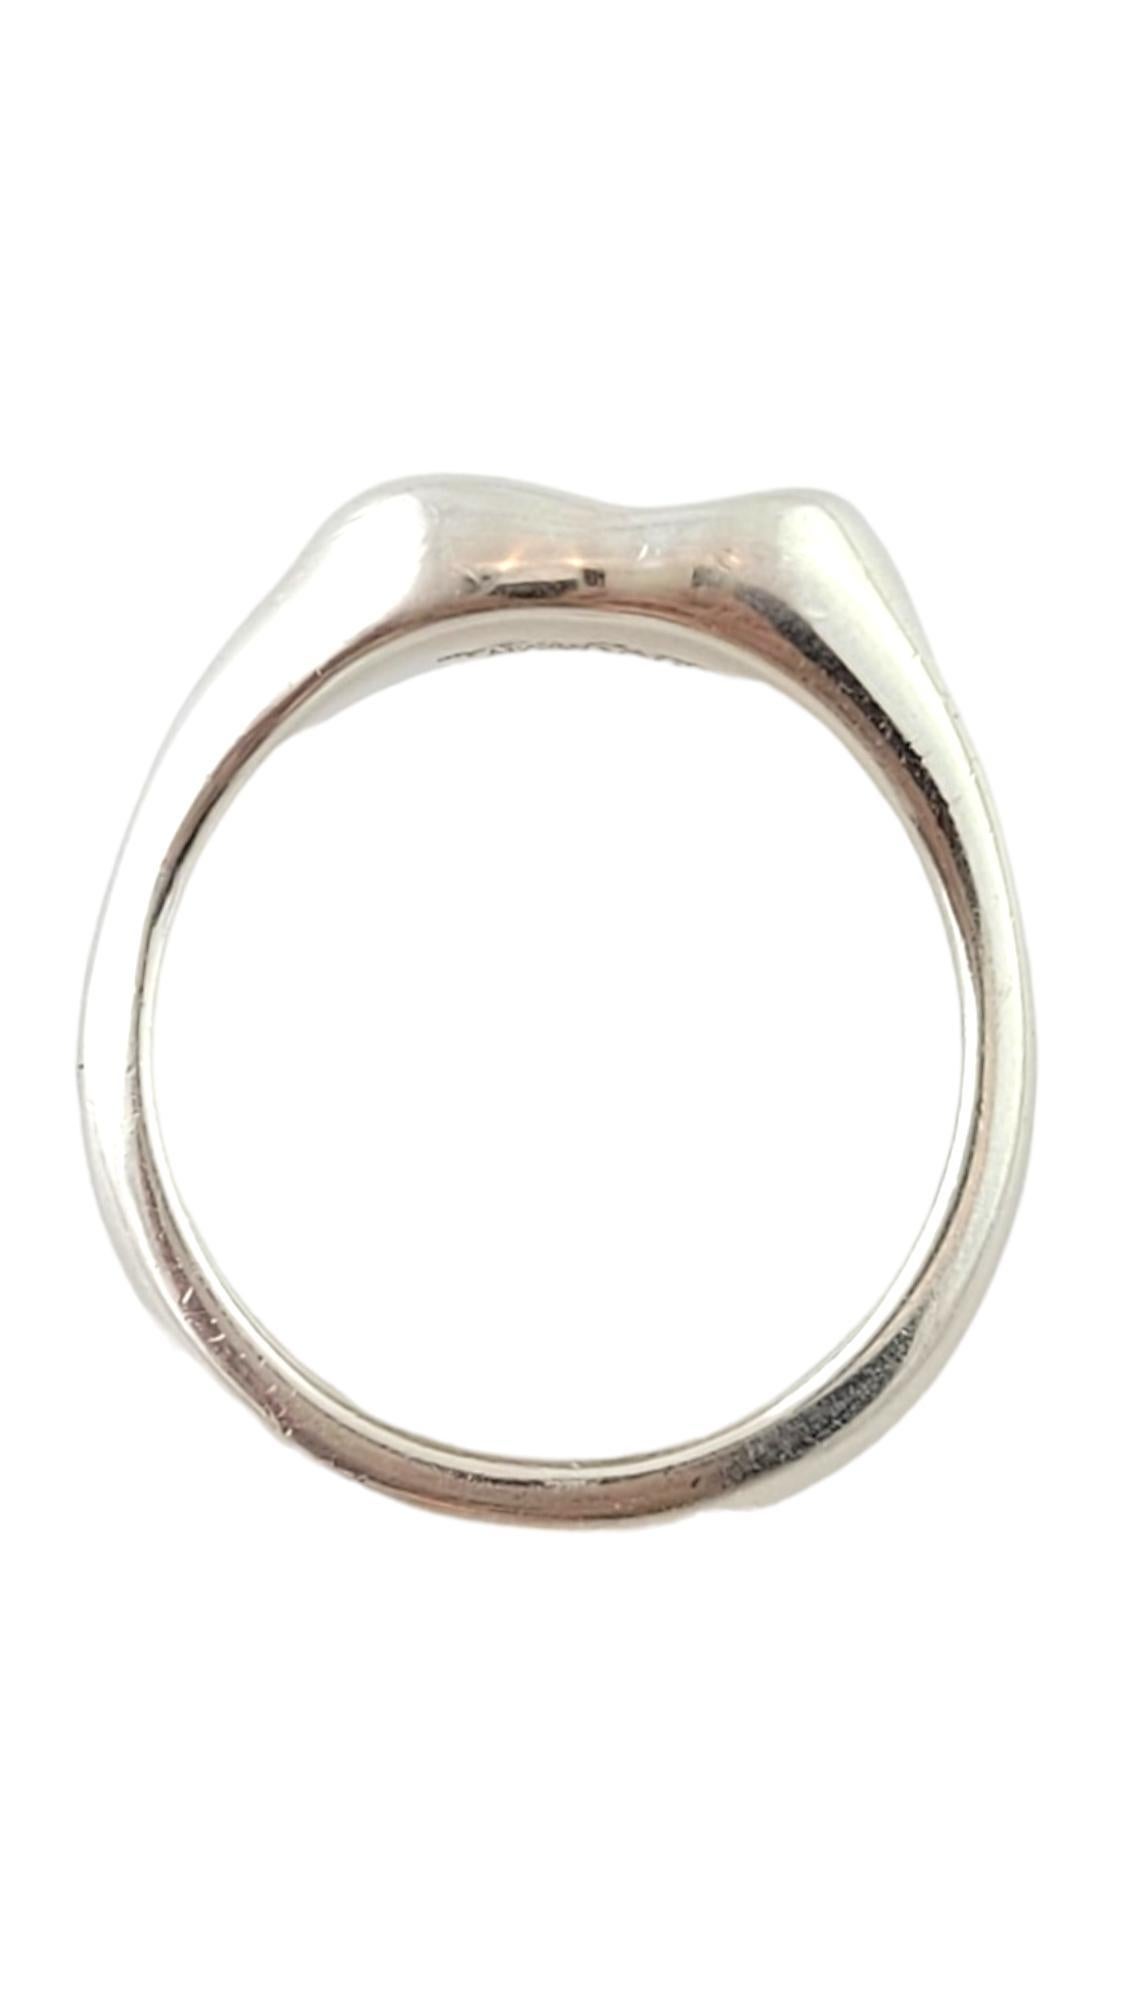 Tiffany & Co. Sterling Silver Elsa Peretti Full Heart Ring Size 5.75 #17486 In Good Condition For Sale In Washington Depot, CT